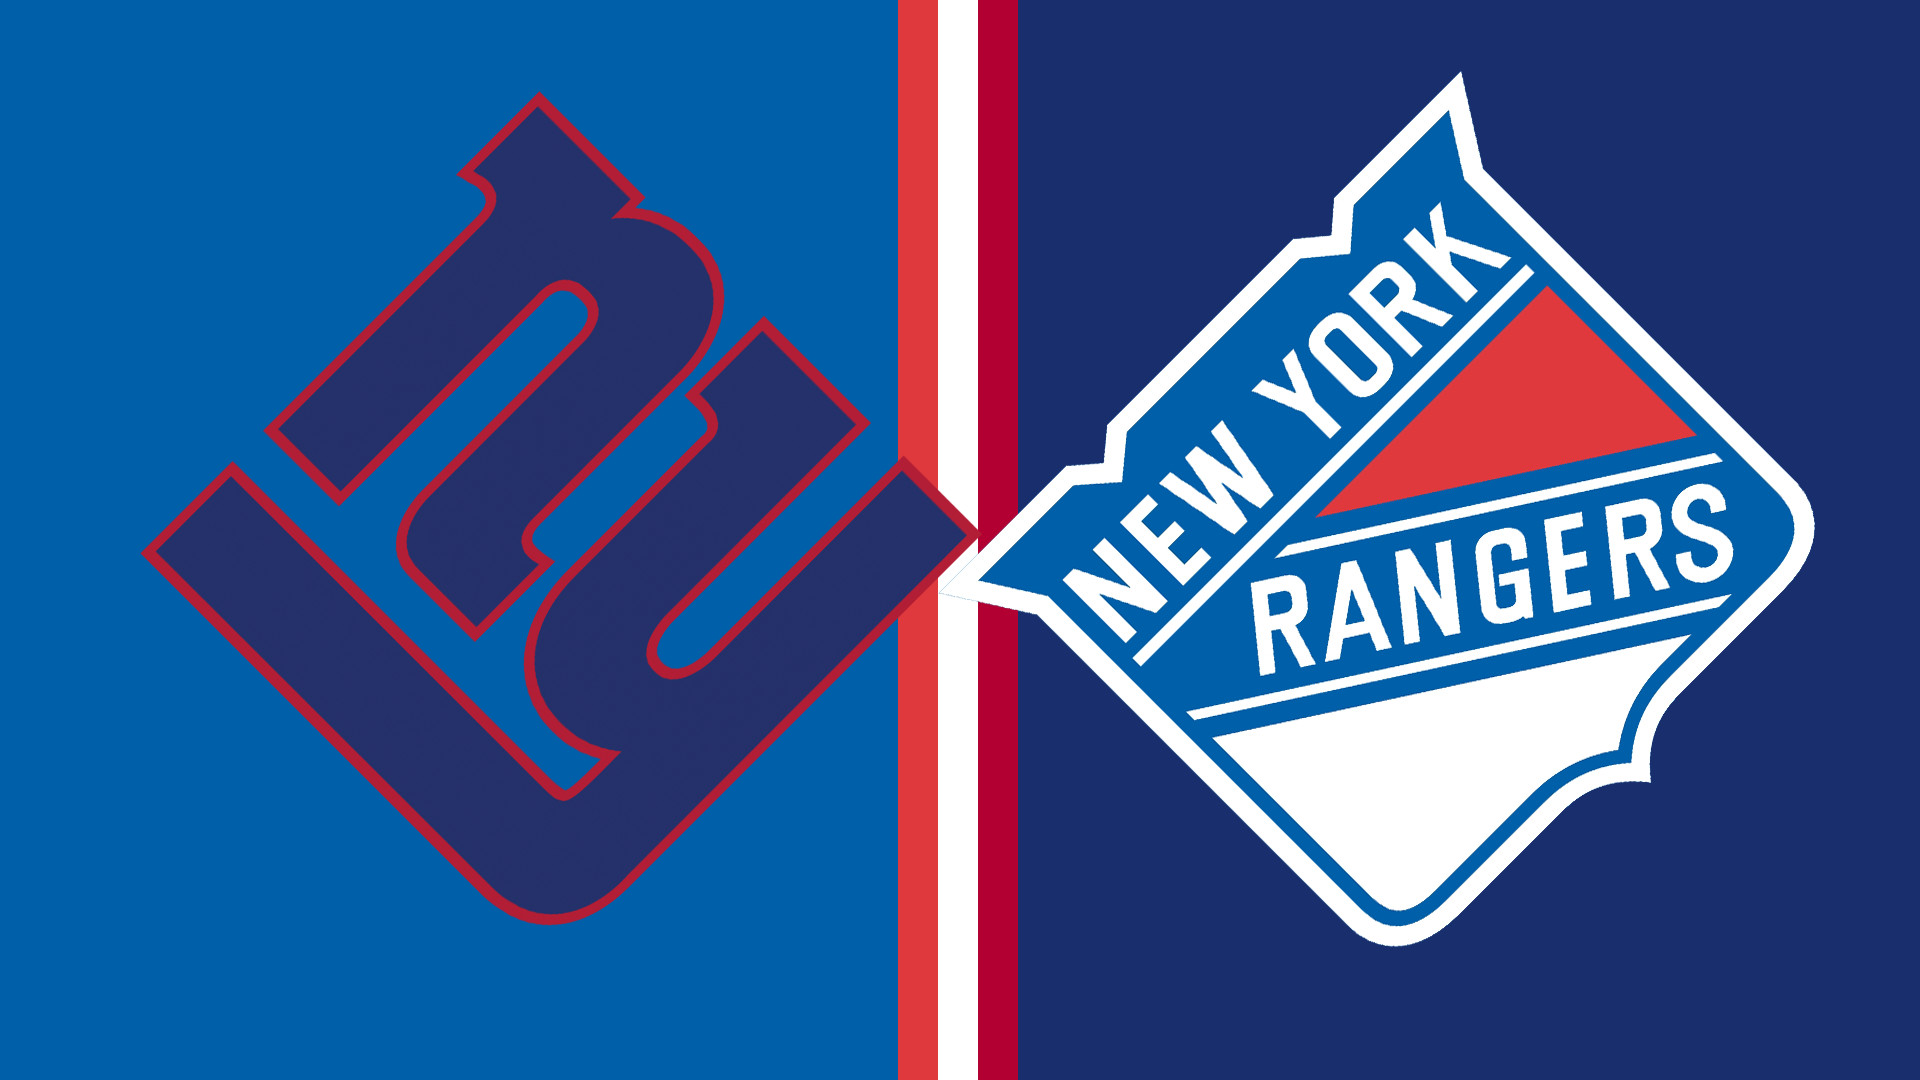 1920x1080 Anybody who is also a NY Giants fan might appreciate this wallpaper I made!